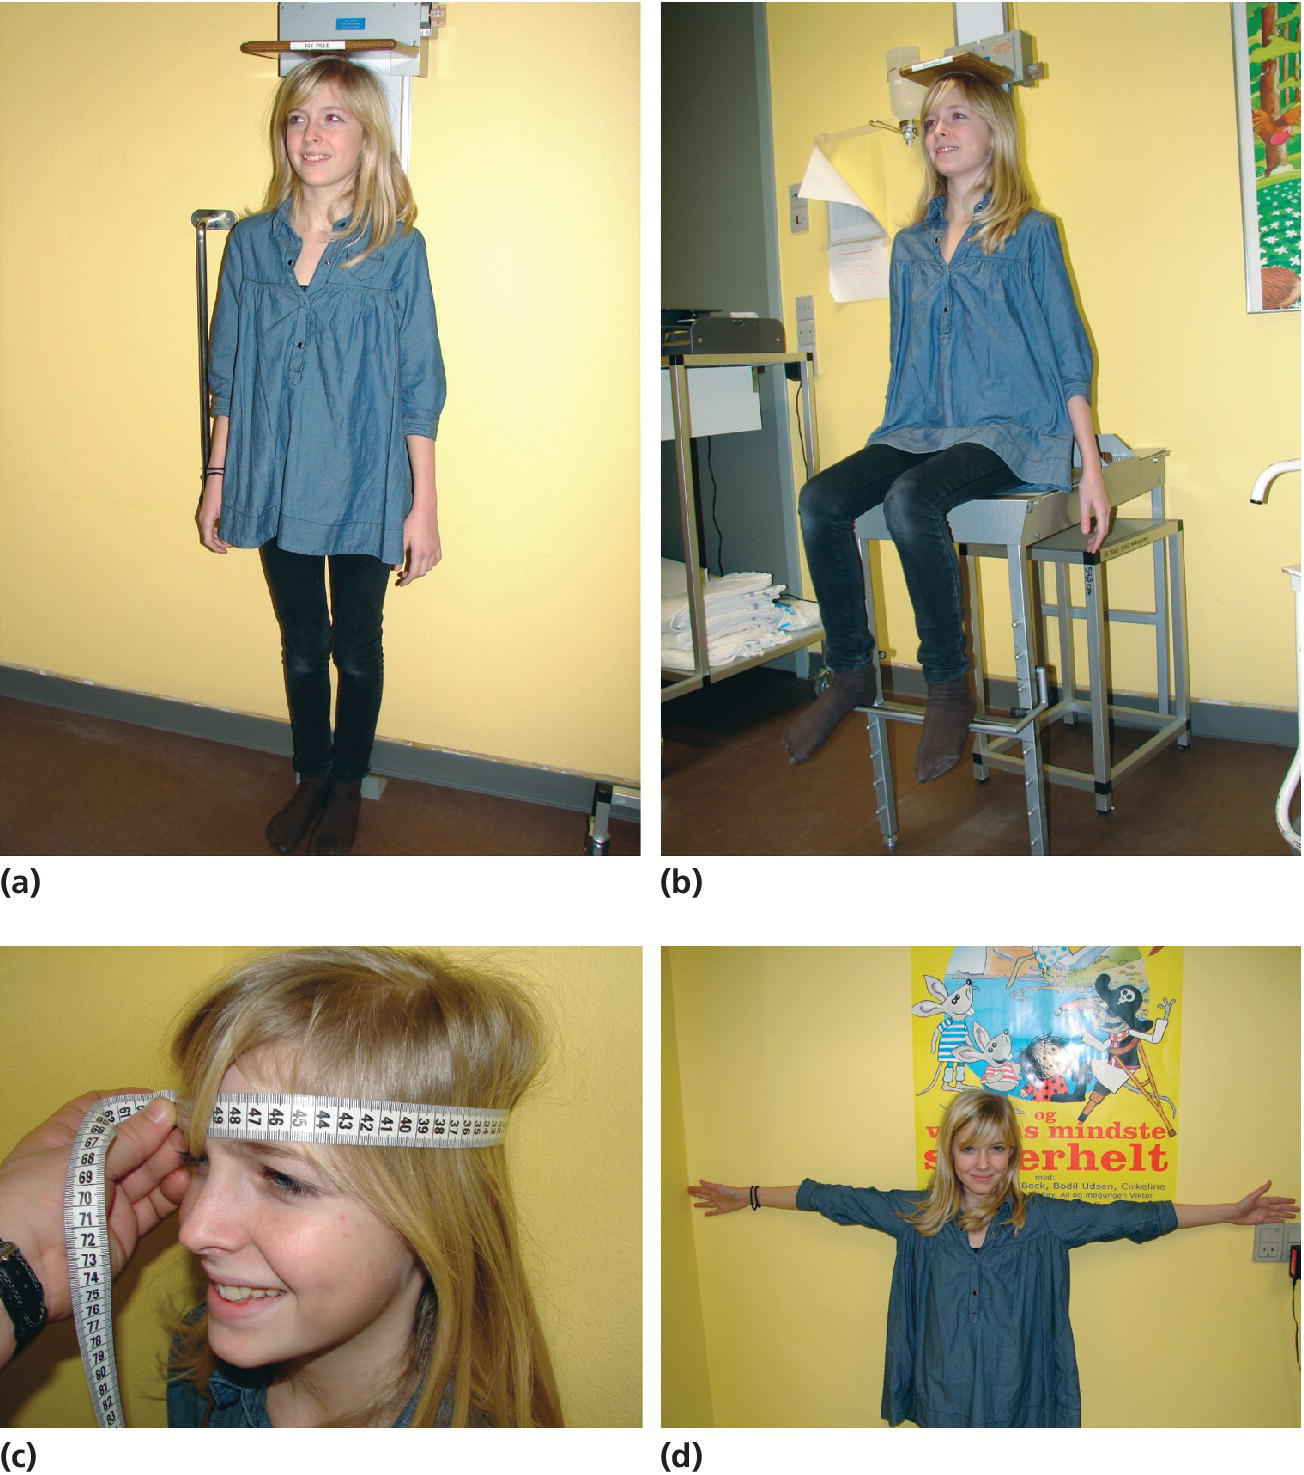 Photos of a girl standing (a), sitting by a wall-mounted stadiometer (b), with measuring tape around her head held by a hand (c), and spreading her arms to the side (d).